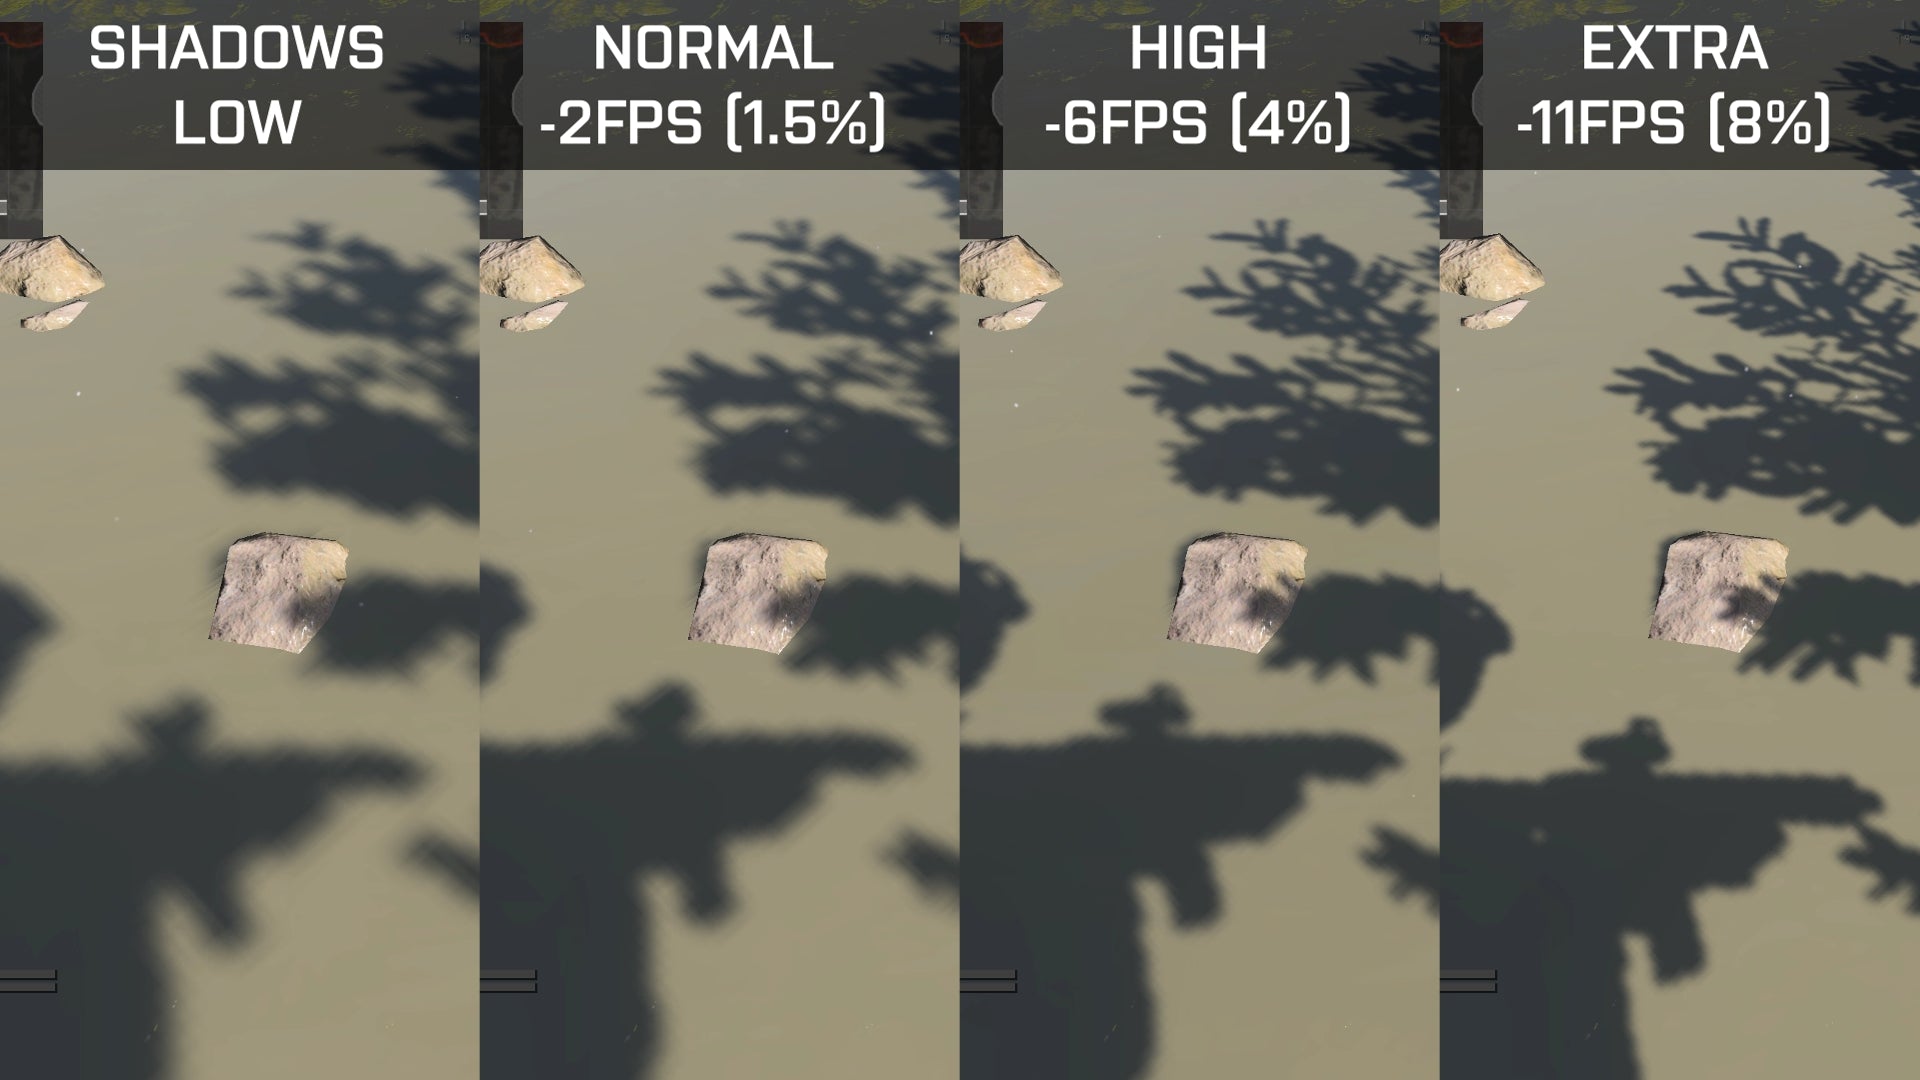 The difference in game picture quality